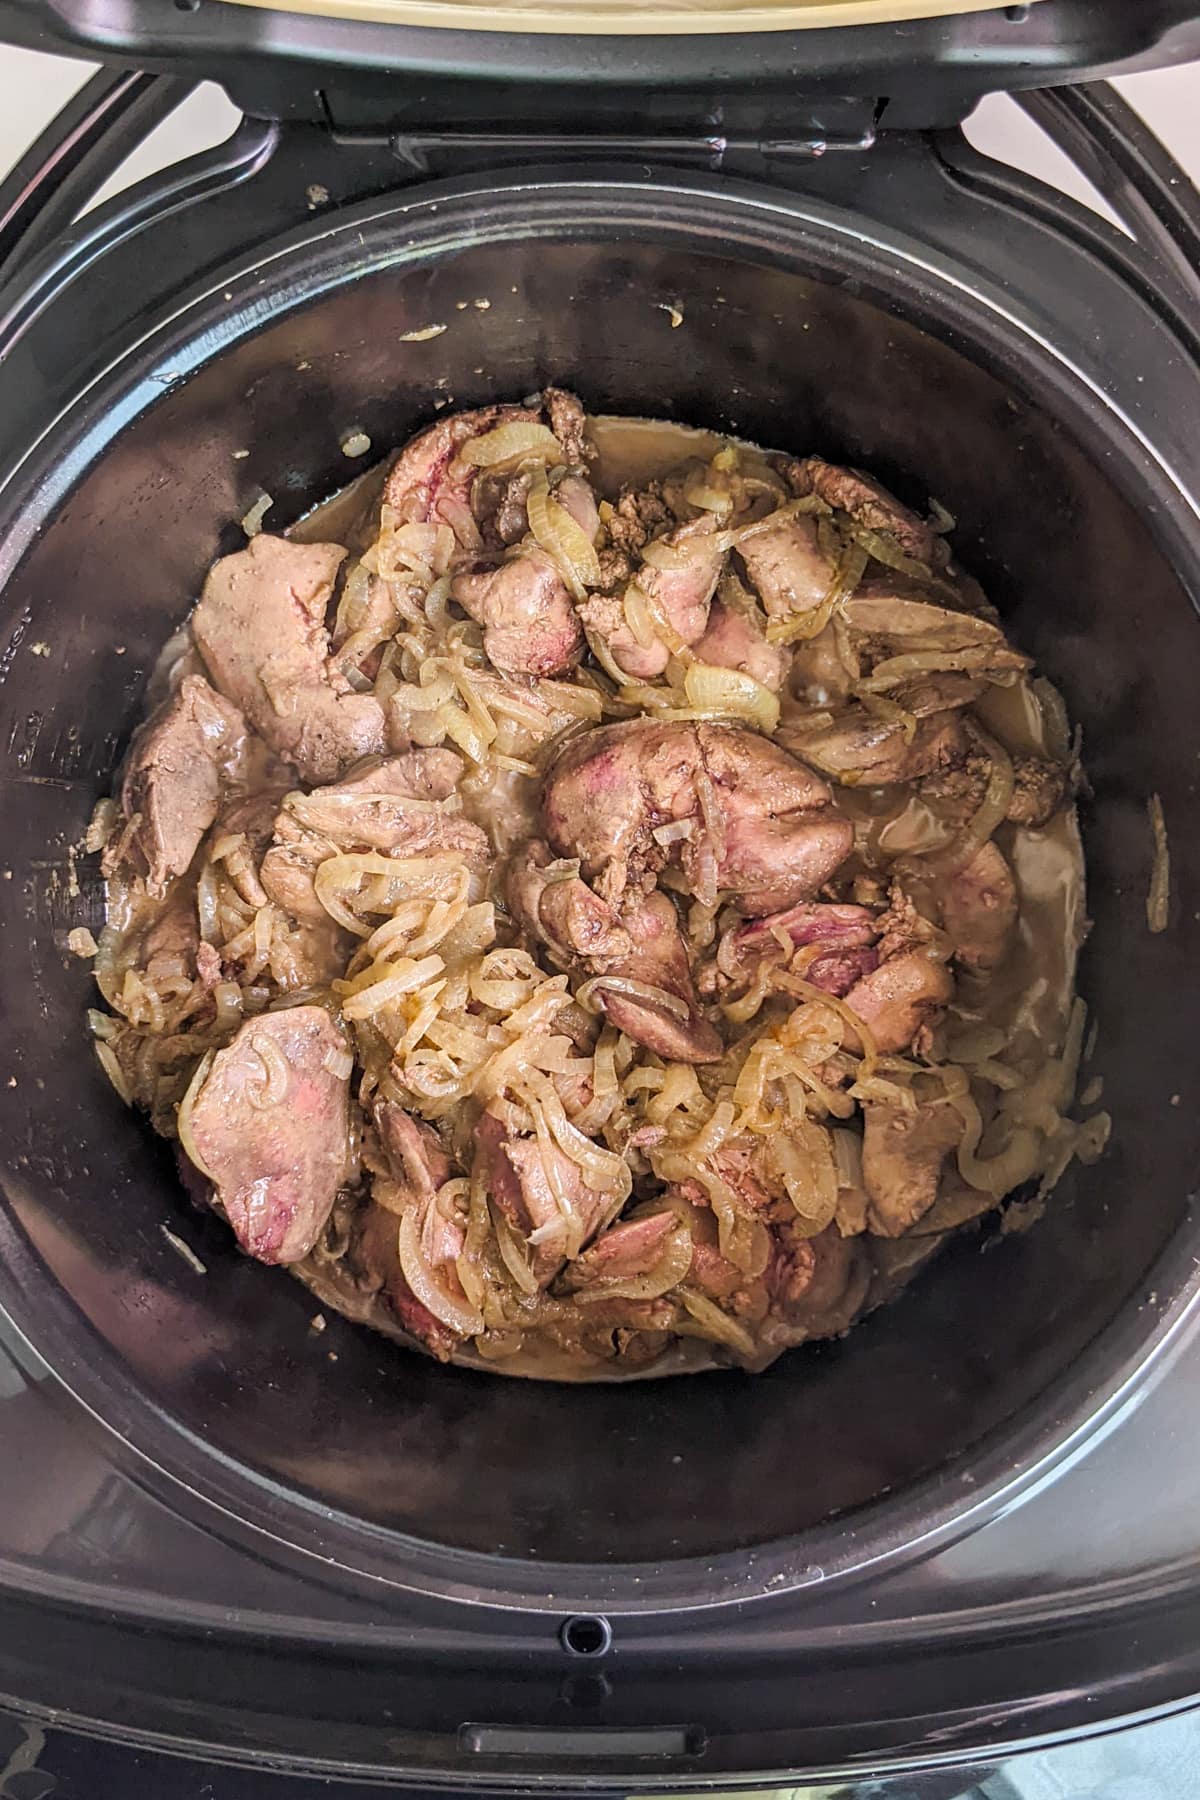 Top view of slow cooker with liver and onions simmering inside.